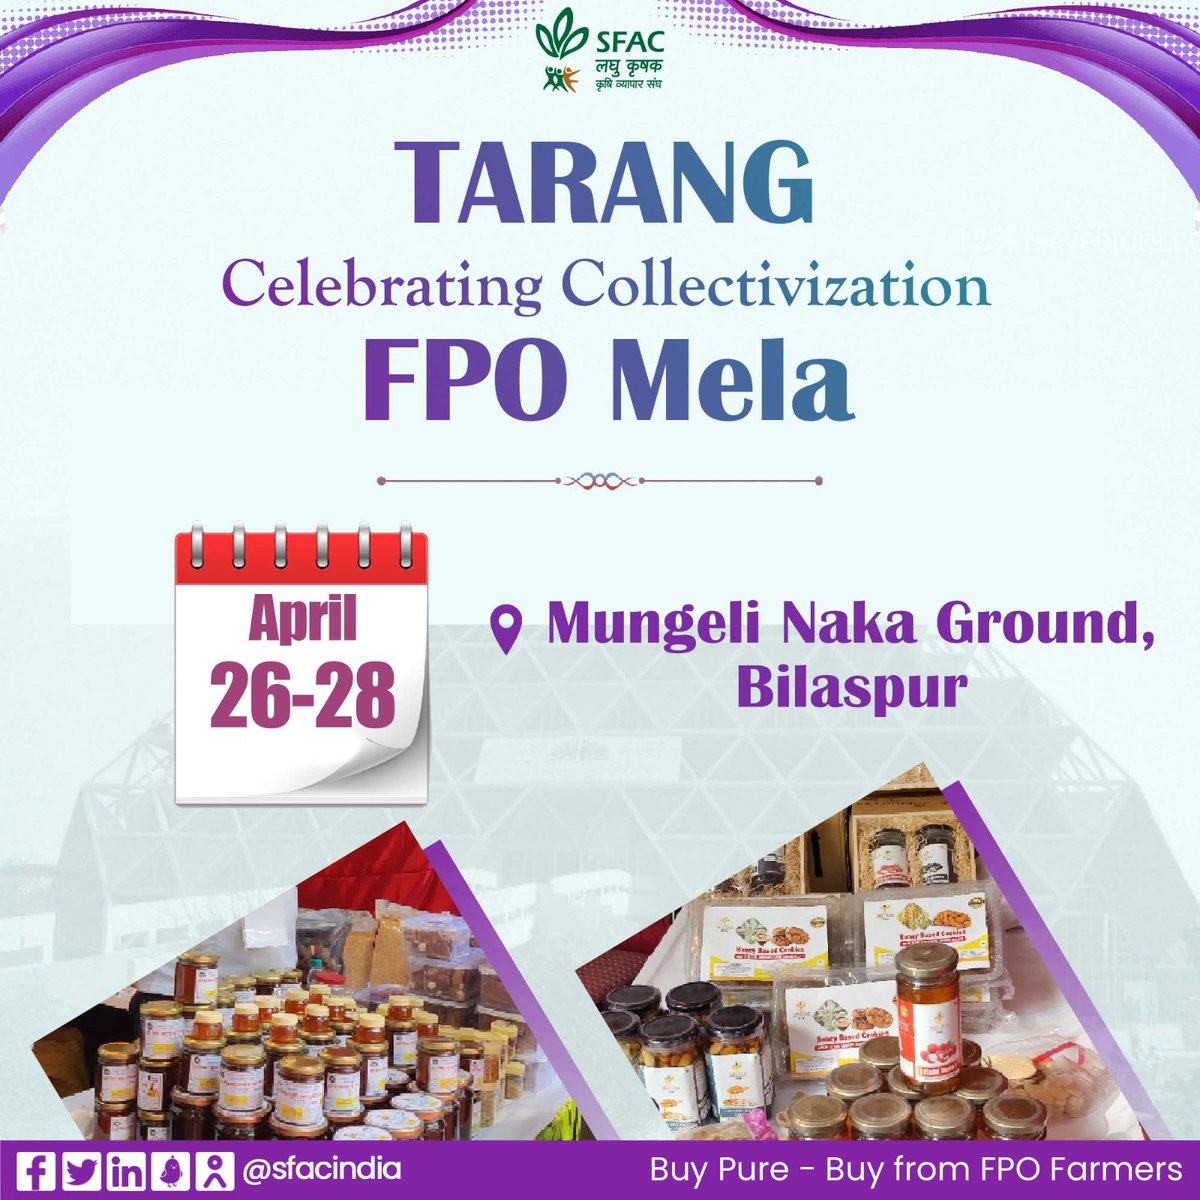 Tarang FPO Mela - phase 2 ✨

It's time to get shopping ready again. Buy pure food items & much more from FPO farmers directly. 
🗓️ 26-28 April 
Mungeli Naka ground, Bilaspur, Chhattisgarh

@AgriGoI @ONDC_Official @NABARDOnline @mirchiplus #Tarang